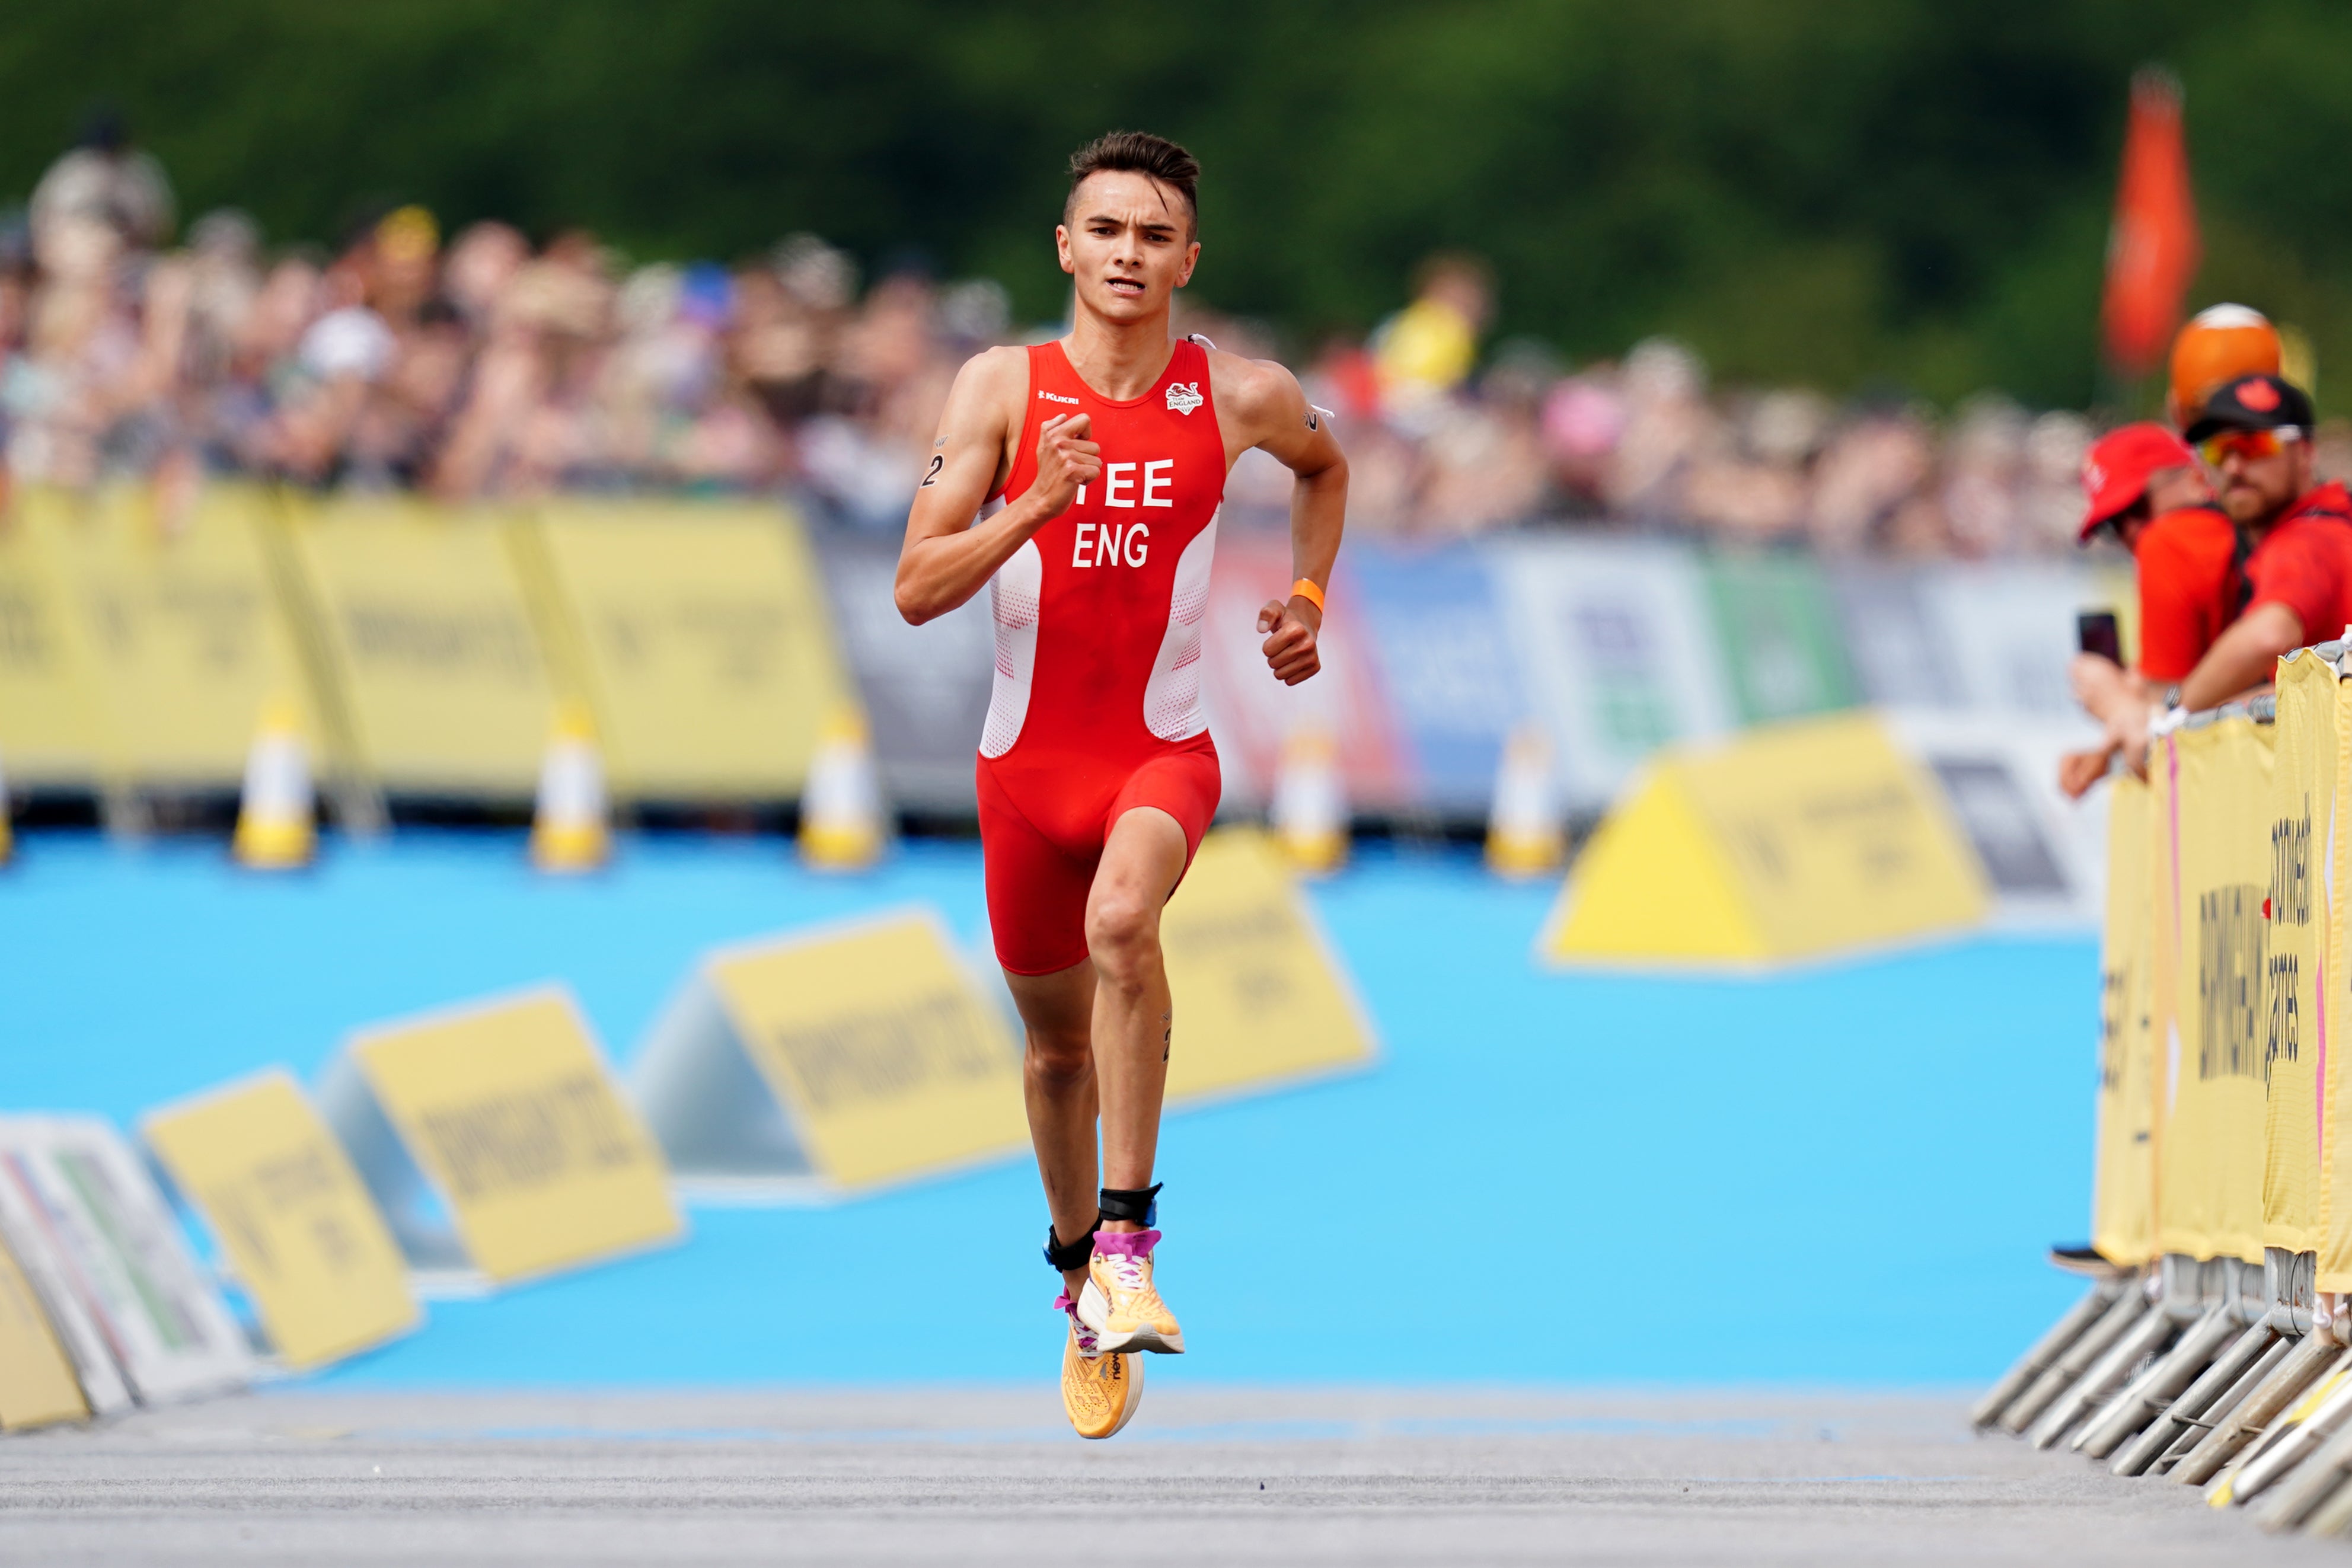 Yee was cheered home for the first gold at the 2022 Commonwealth Games (David Davies/PA)